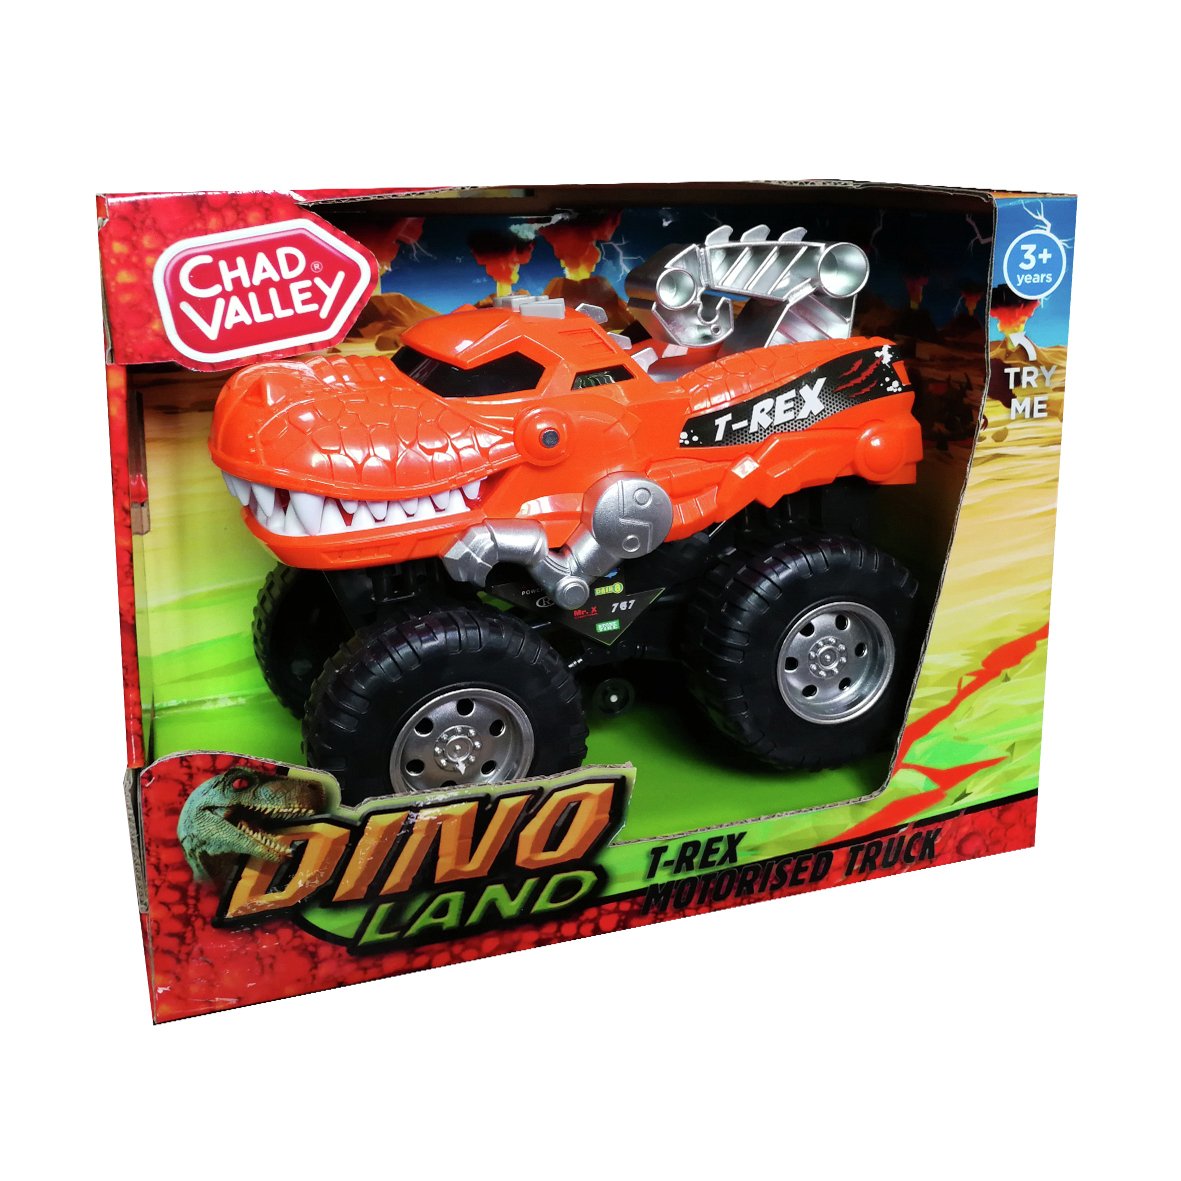 Chad Valley T.Rex Truck Review